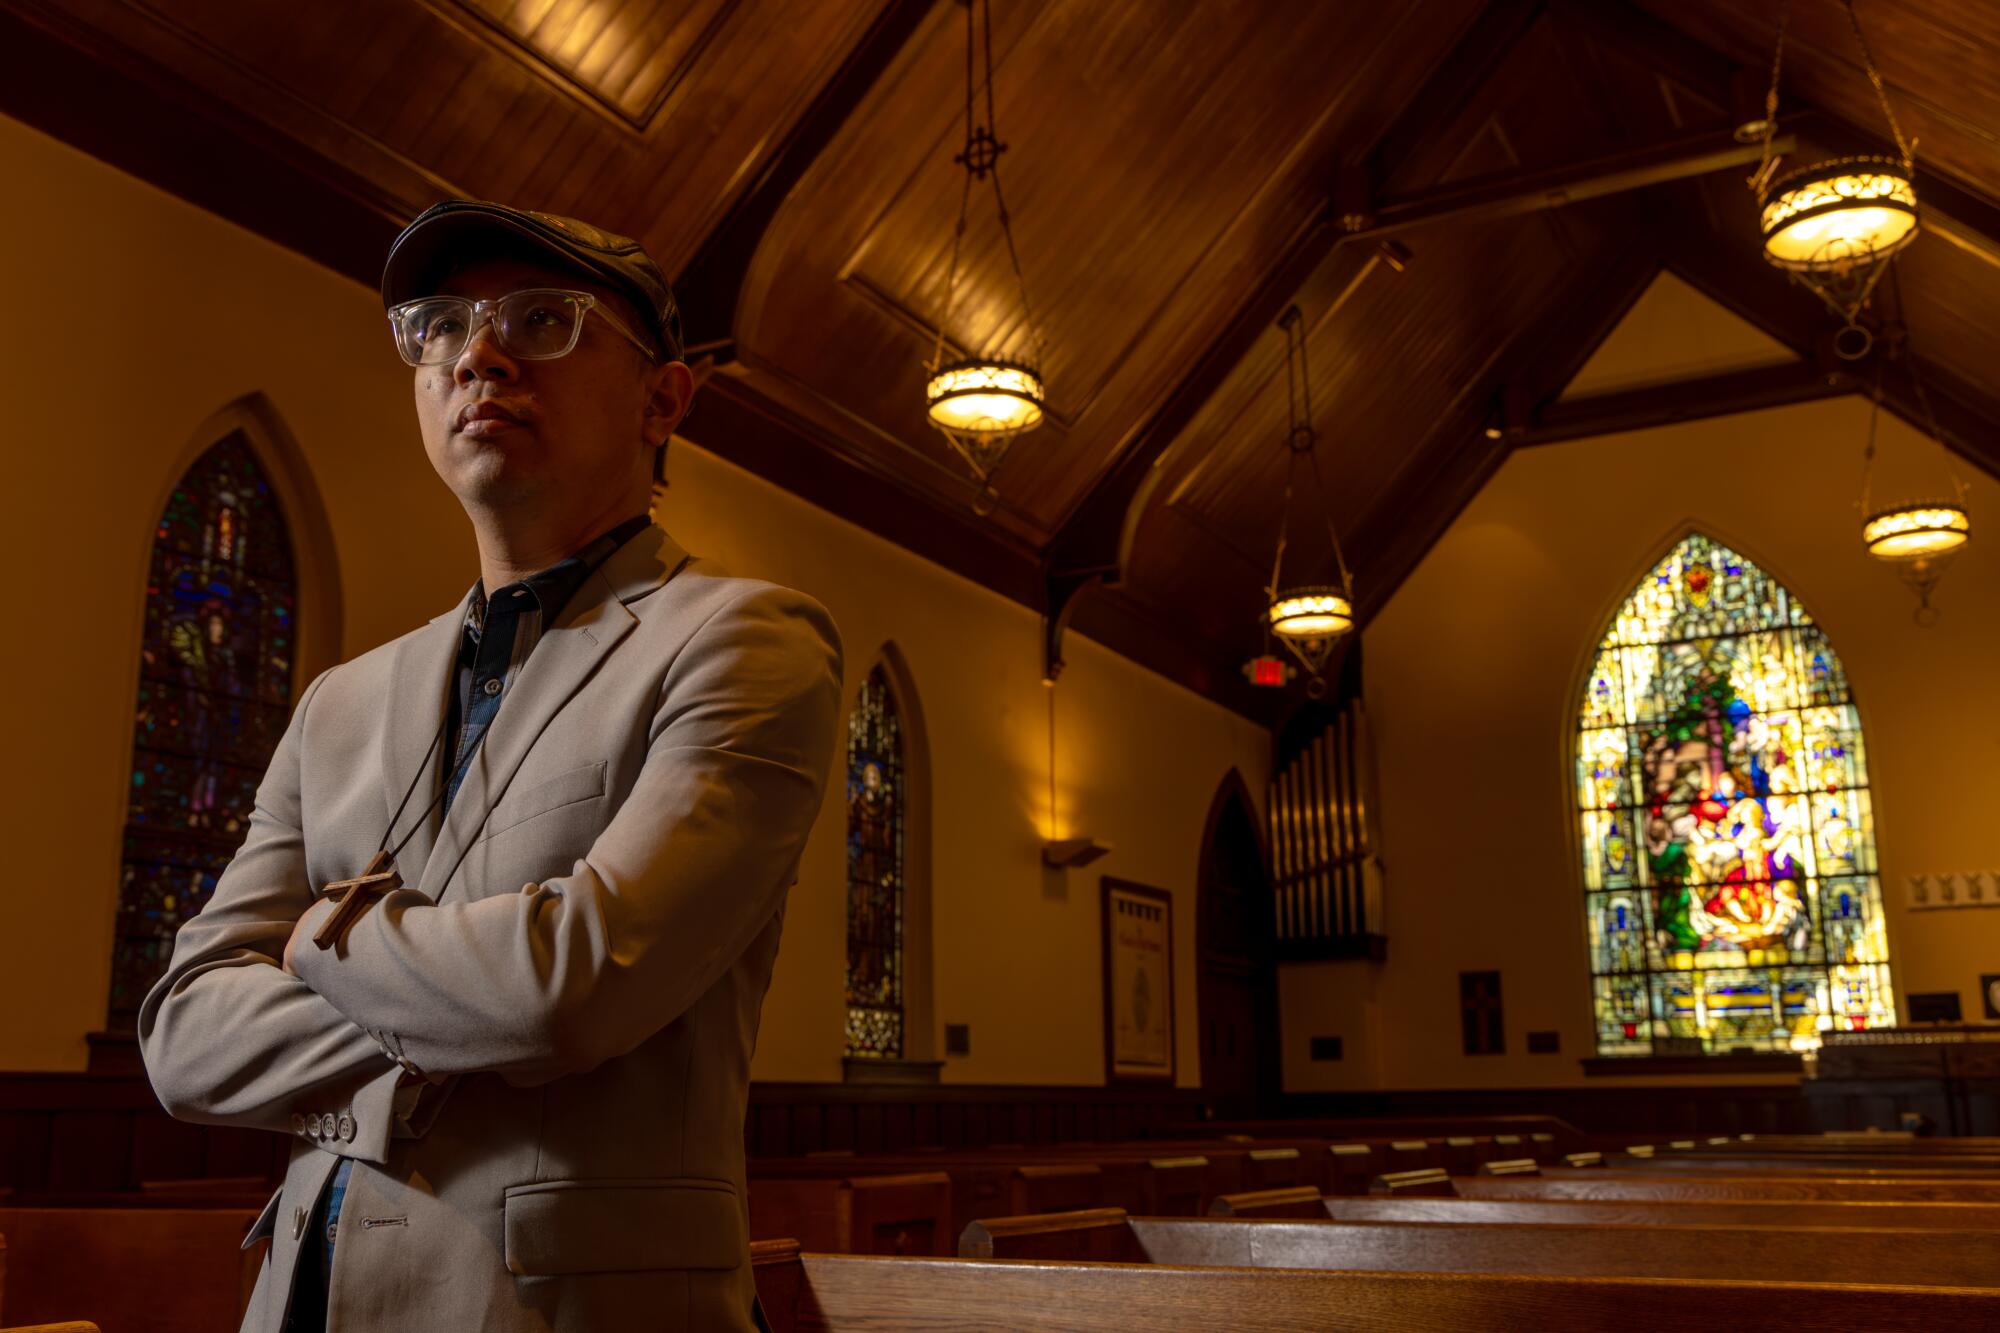 Eric Chen, shown inside Church of Our Savior, is a pastor and speech and debate coach at Gabrielino High School.